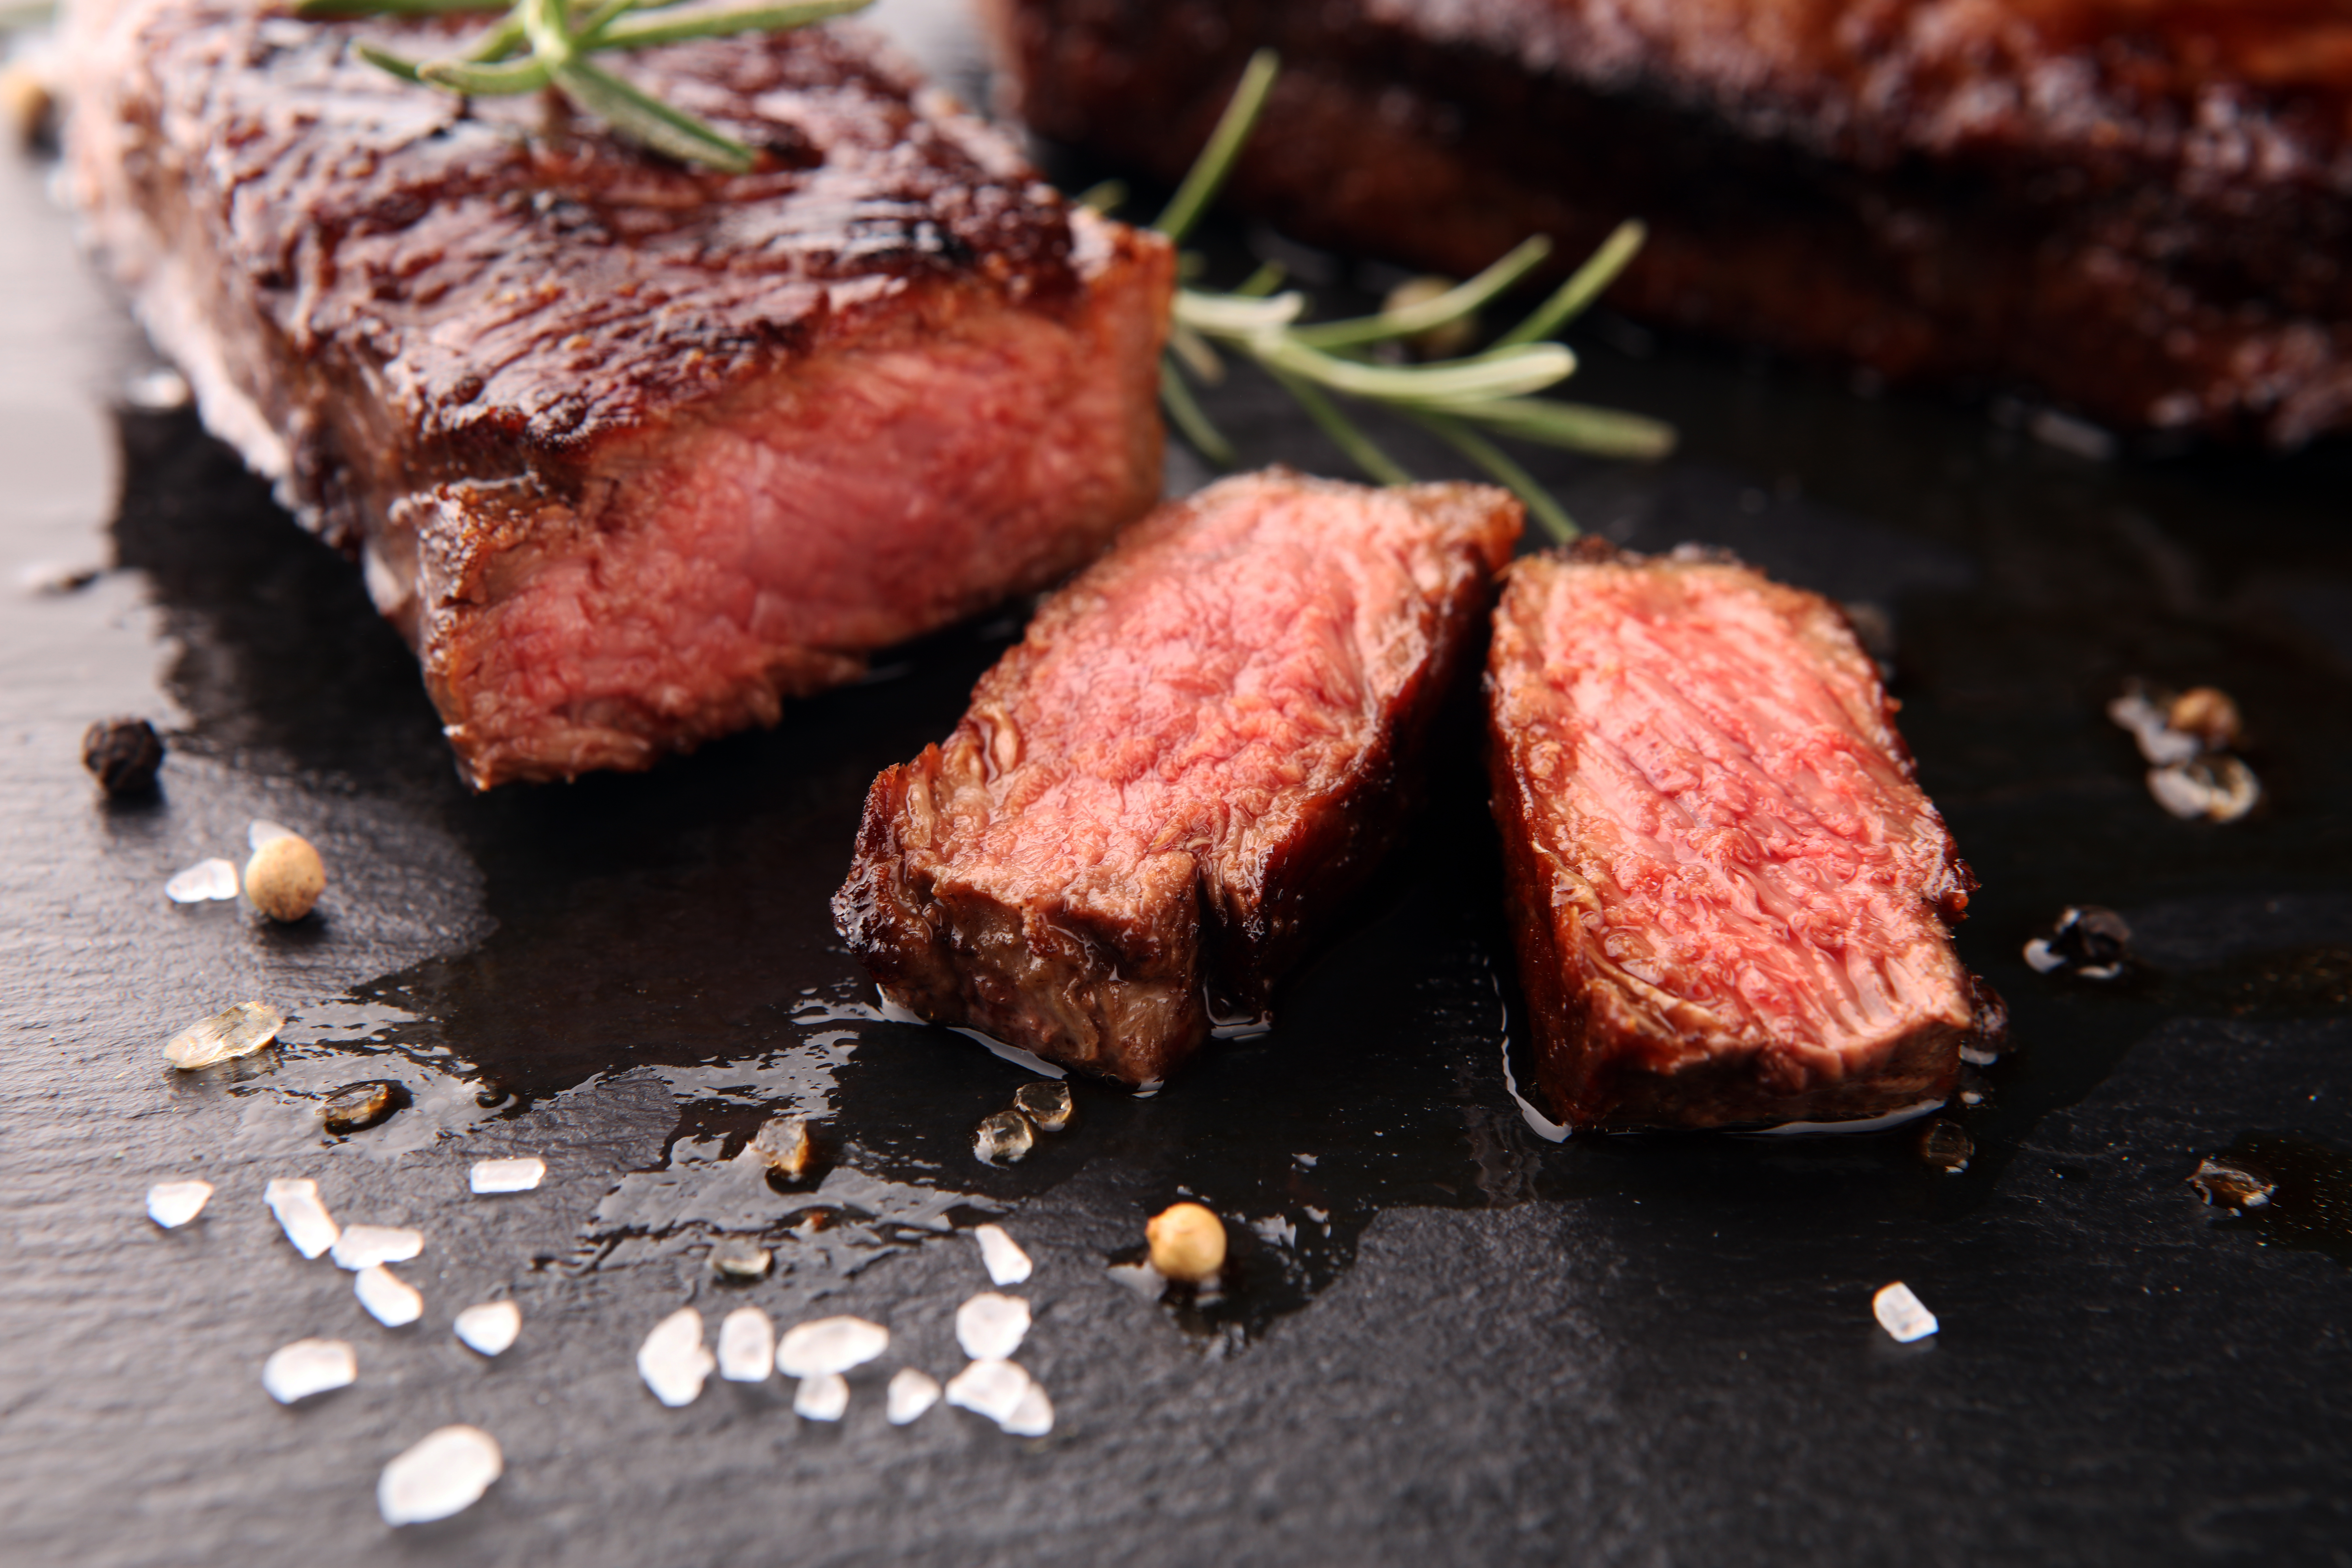 Get Ready For Plant-Based “Steak”